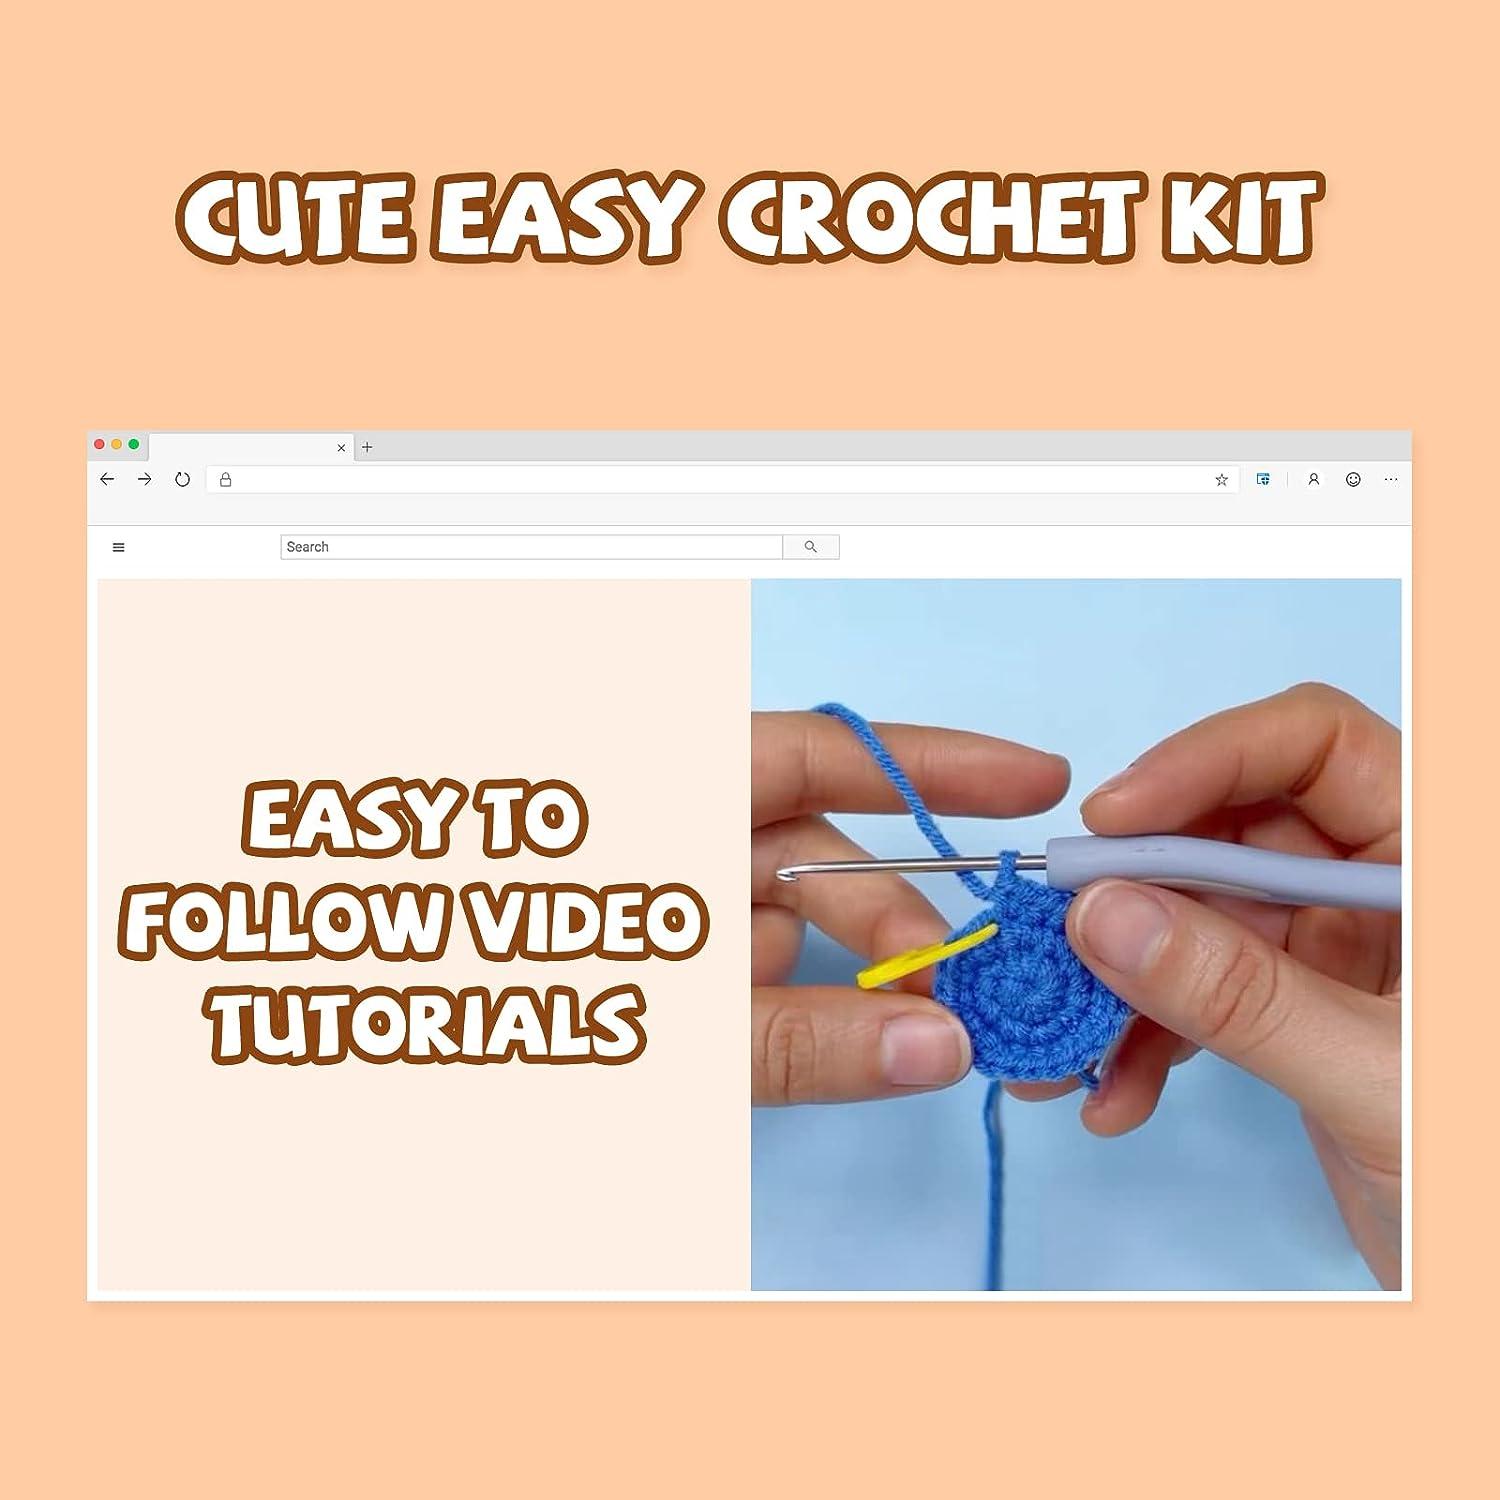 Zeitlicht Crochet Kit for Beginners, Crochet Starter Kit for Adults and  Kids Complete Crochet Set to Make 3 PCS Animals, Learn to Crochet with  Step-by-Step Instruction and Video (Penguin+Dinosaur+Owl)